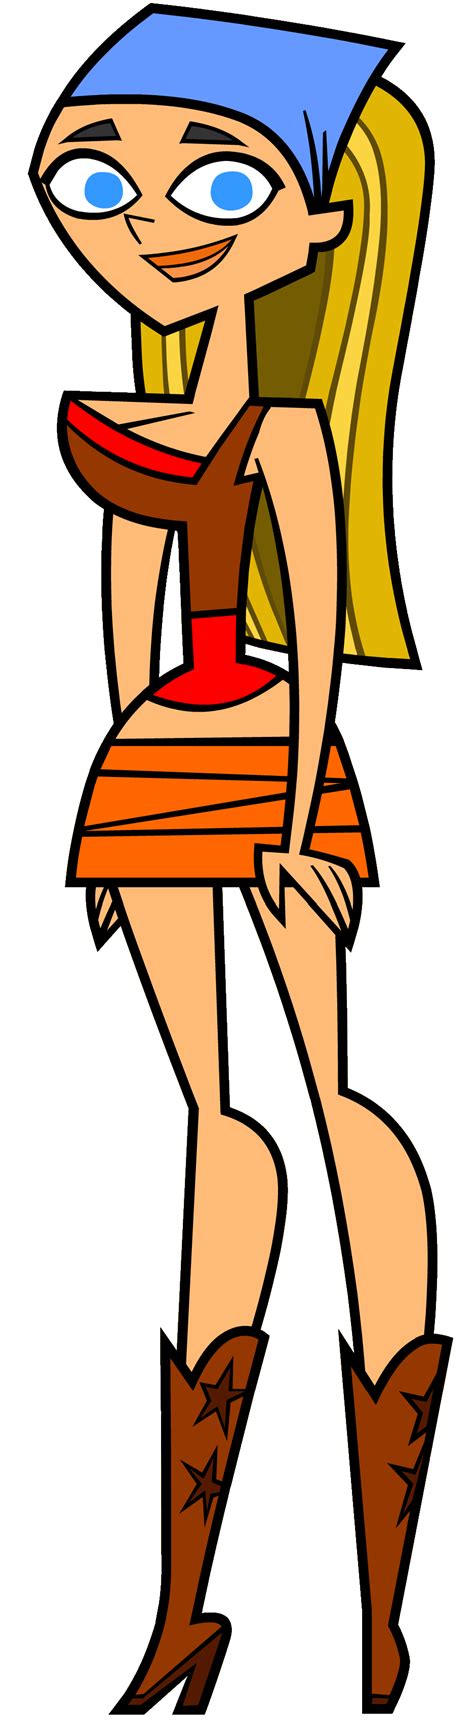 Lindsay total drama island - So when it comes to the ages of the characters in Total Drama, it's been confirmed that starting in Island, all the characters were 16 years old, which made sense for all of the contestants who definitely acted like teenagers. However, we were never really given an update on their age or even if they aged at all until the Ridonculous Race came ... 